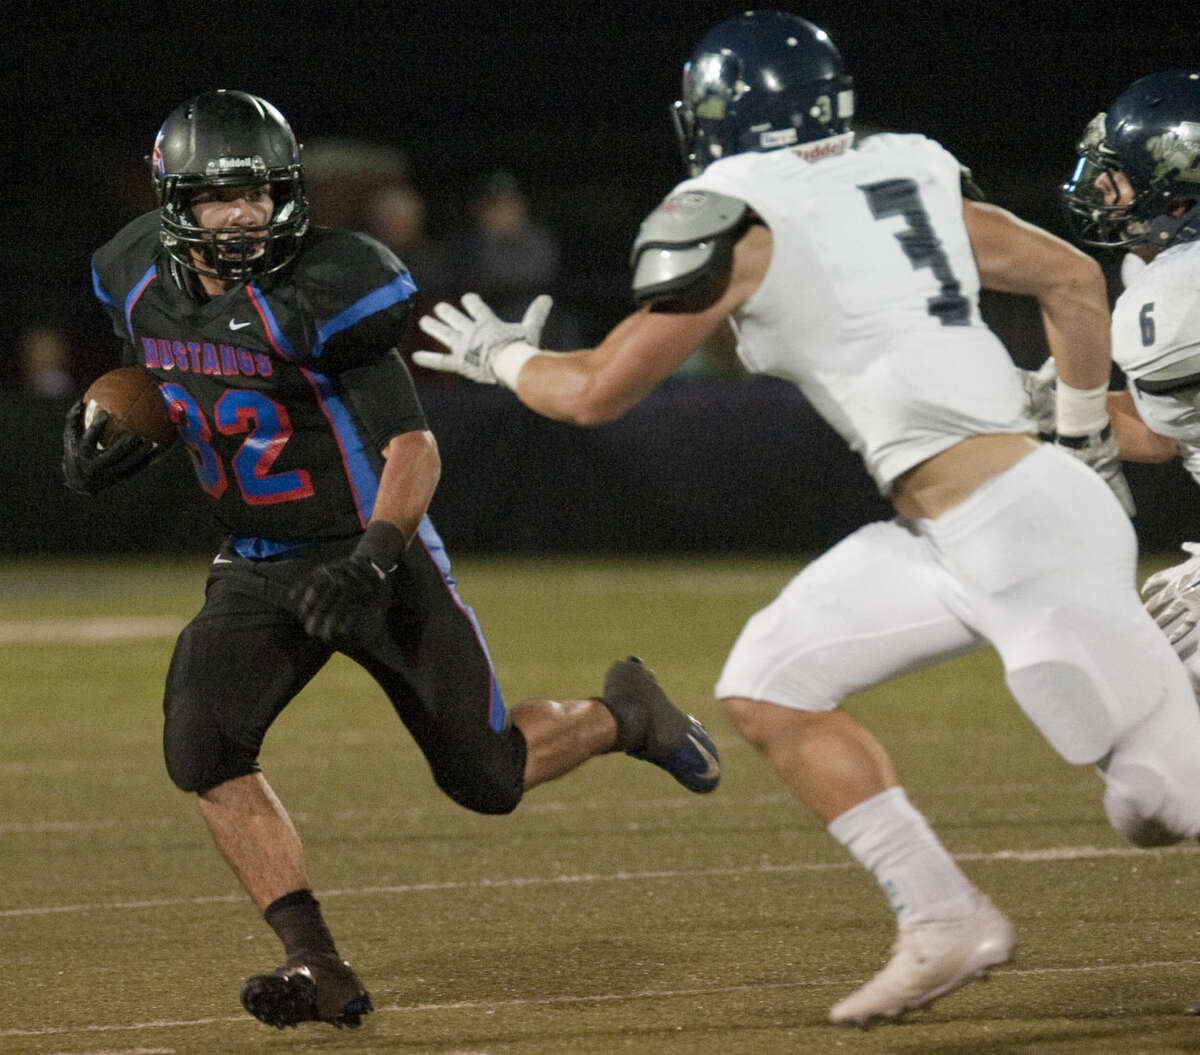 Midland Christian's Justin Fender tries to get around Argyle Liberty's Hunter Griffith Friday at Mustang Field. Tim Fischer\Reporter-Telegram